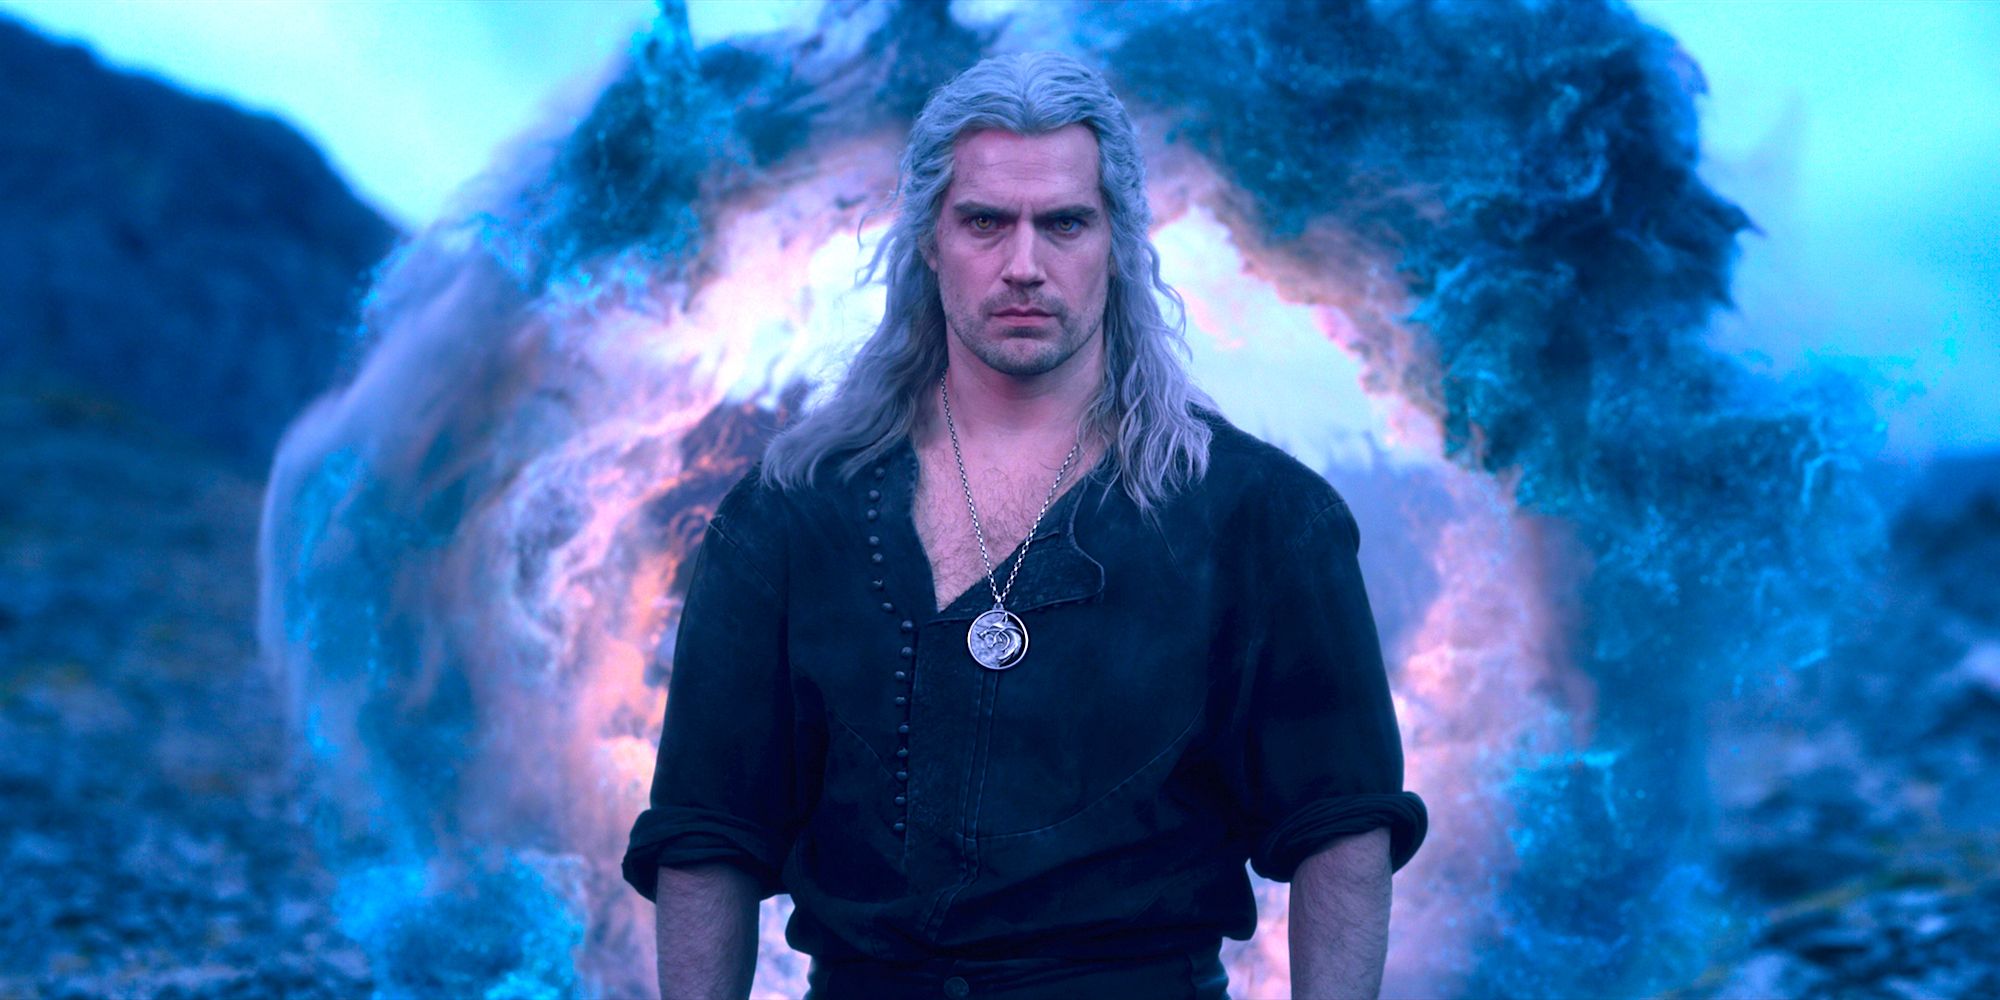 Henry Cavill as Geralt of Rivia in front of a circle of smoke in The Witcher season 3